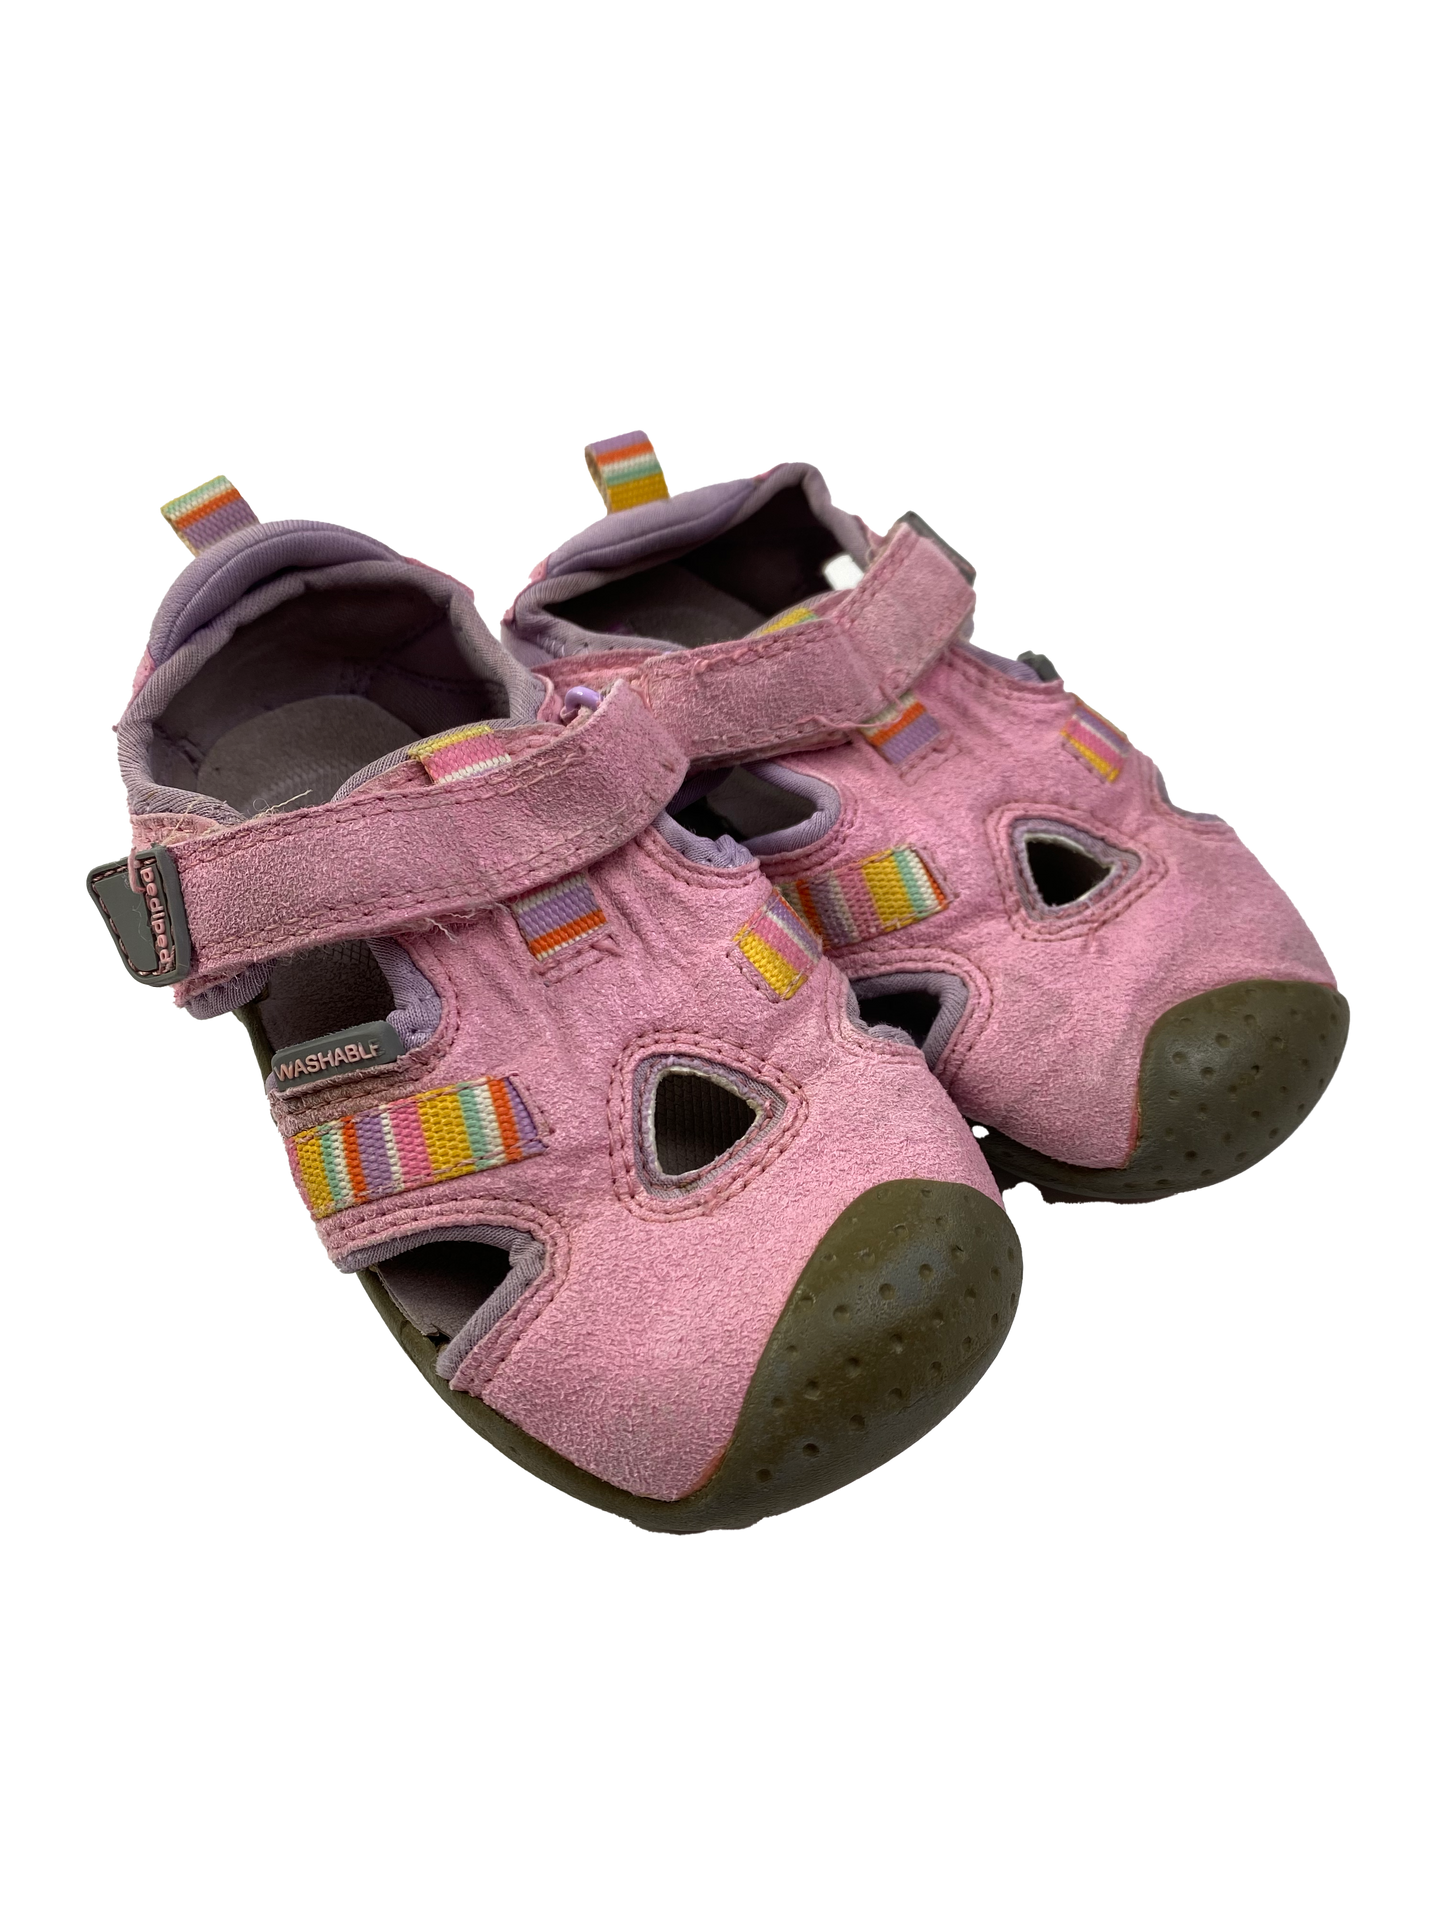 Pediped Pink Velcro Sandals 8